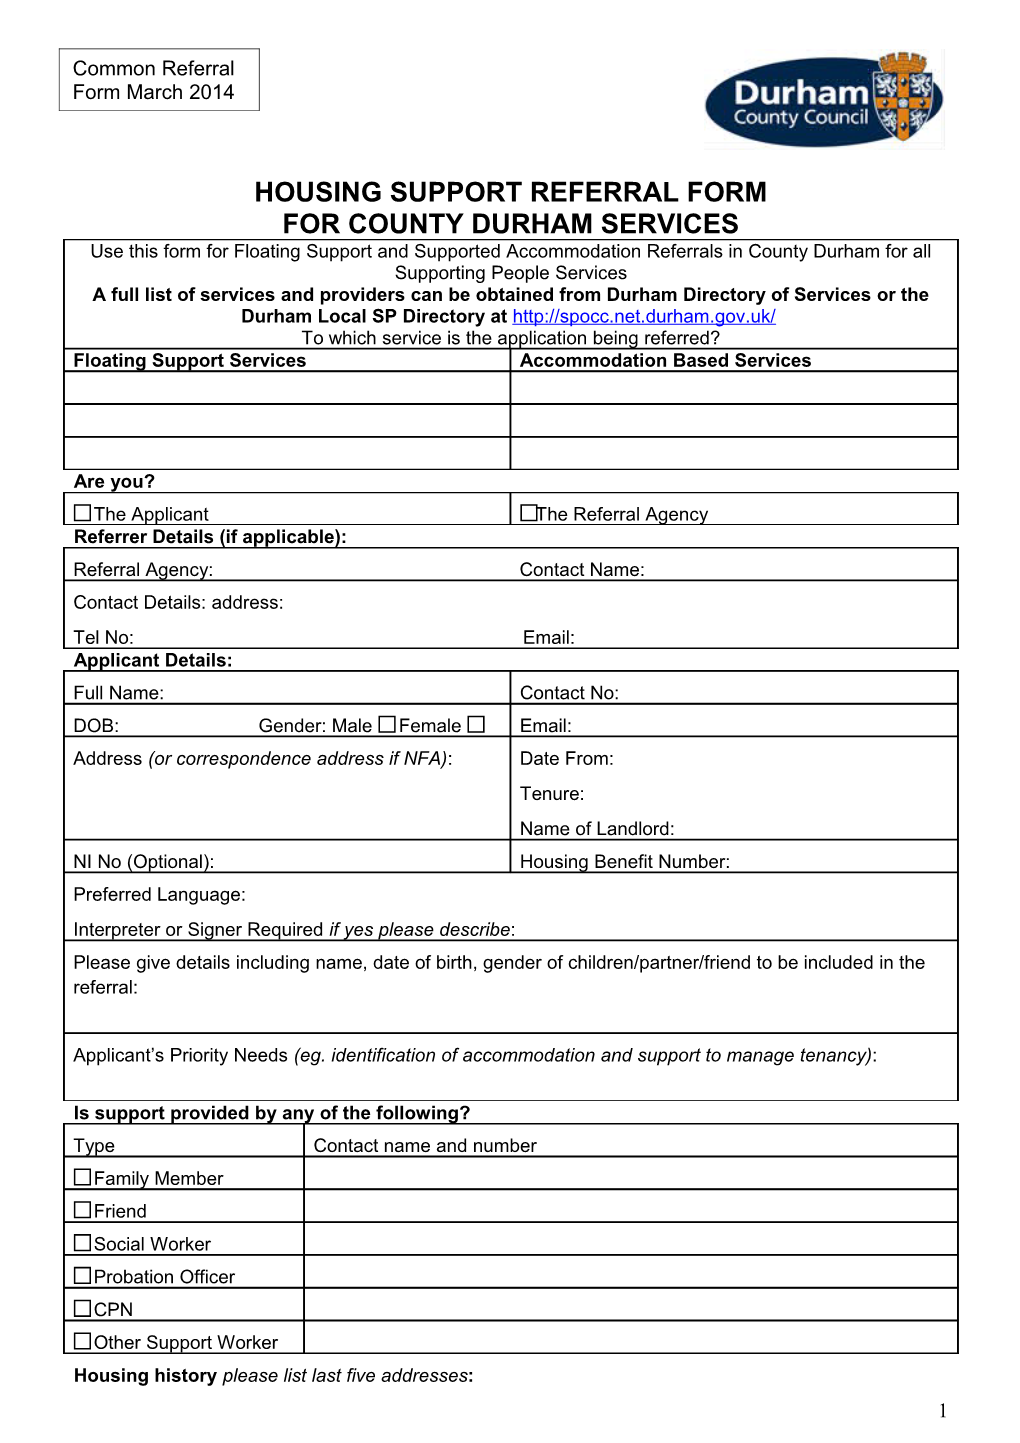 Durham City Housing Support Referral Form